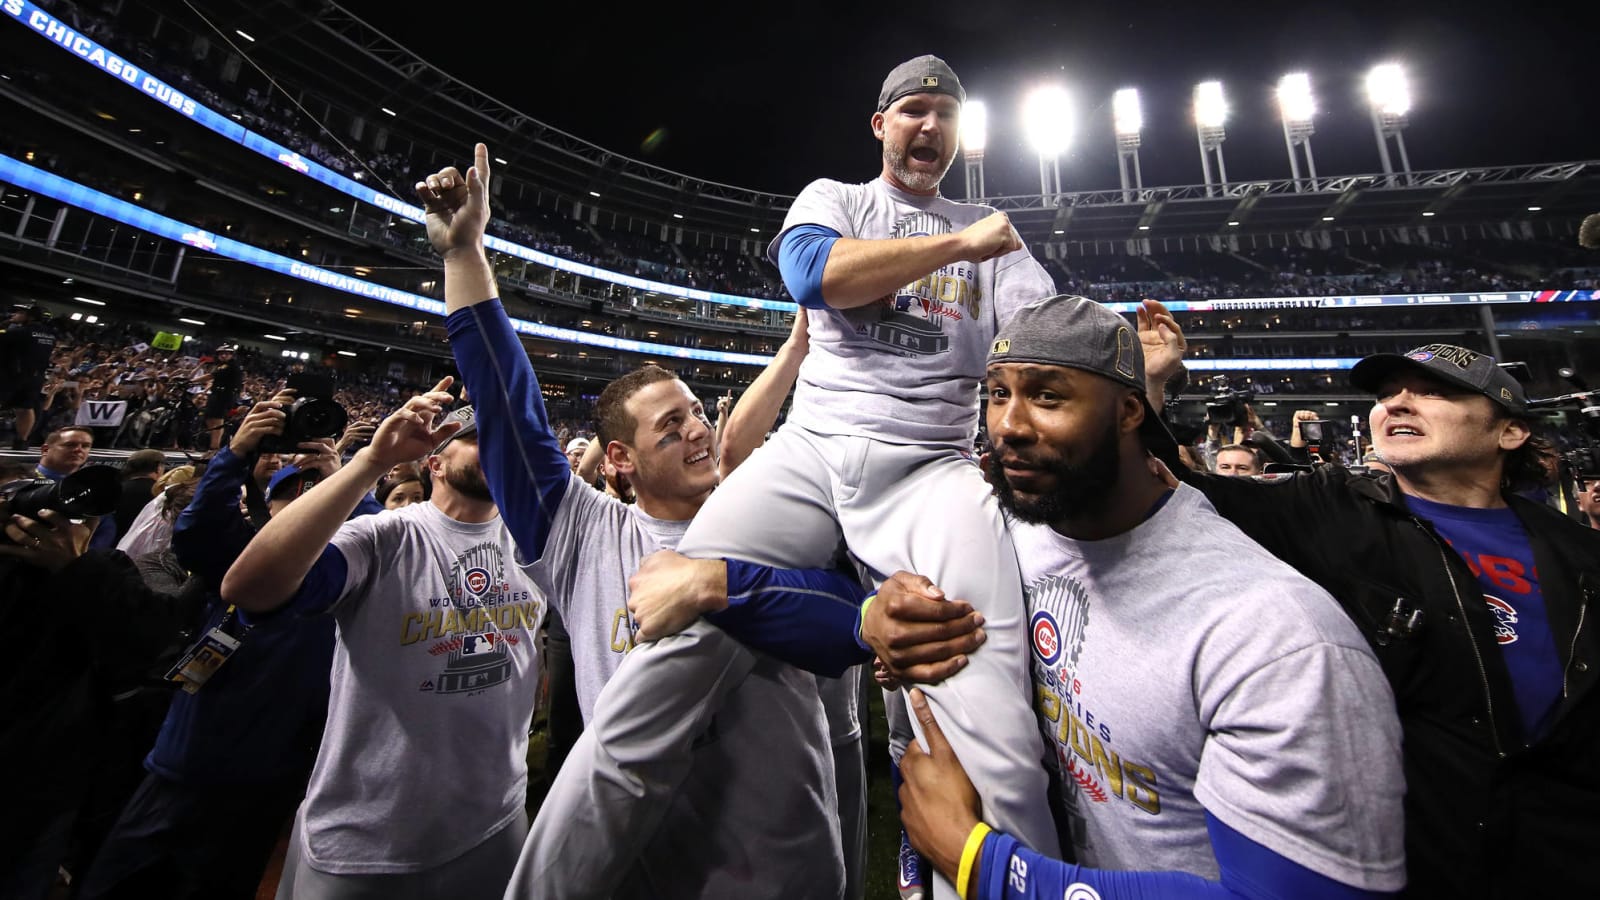 The greatest postseason moment for every MLB team